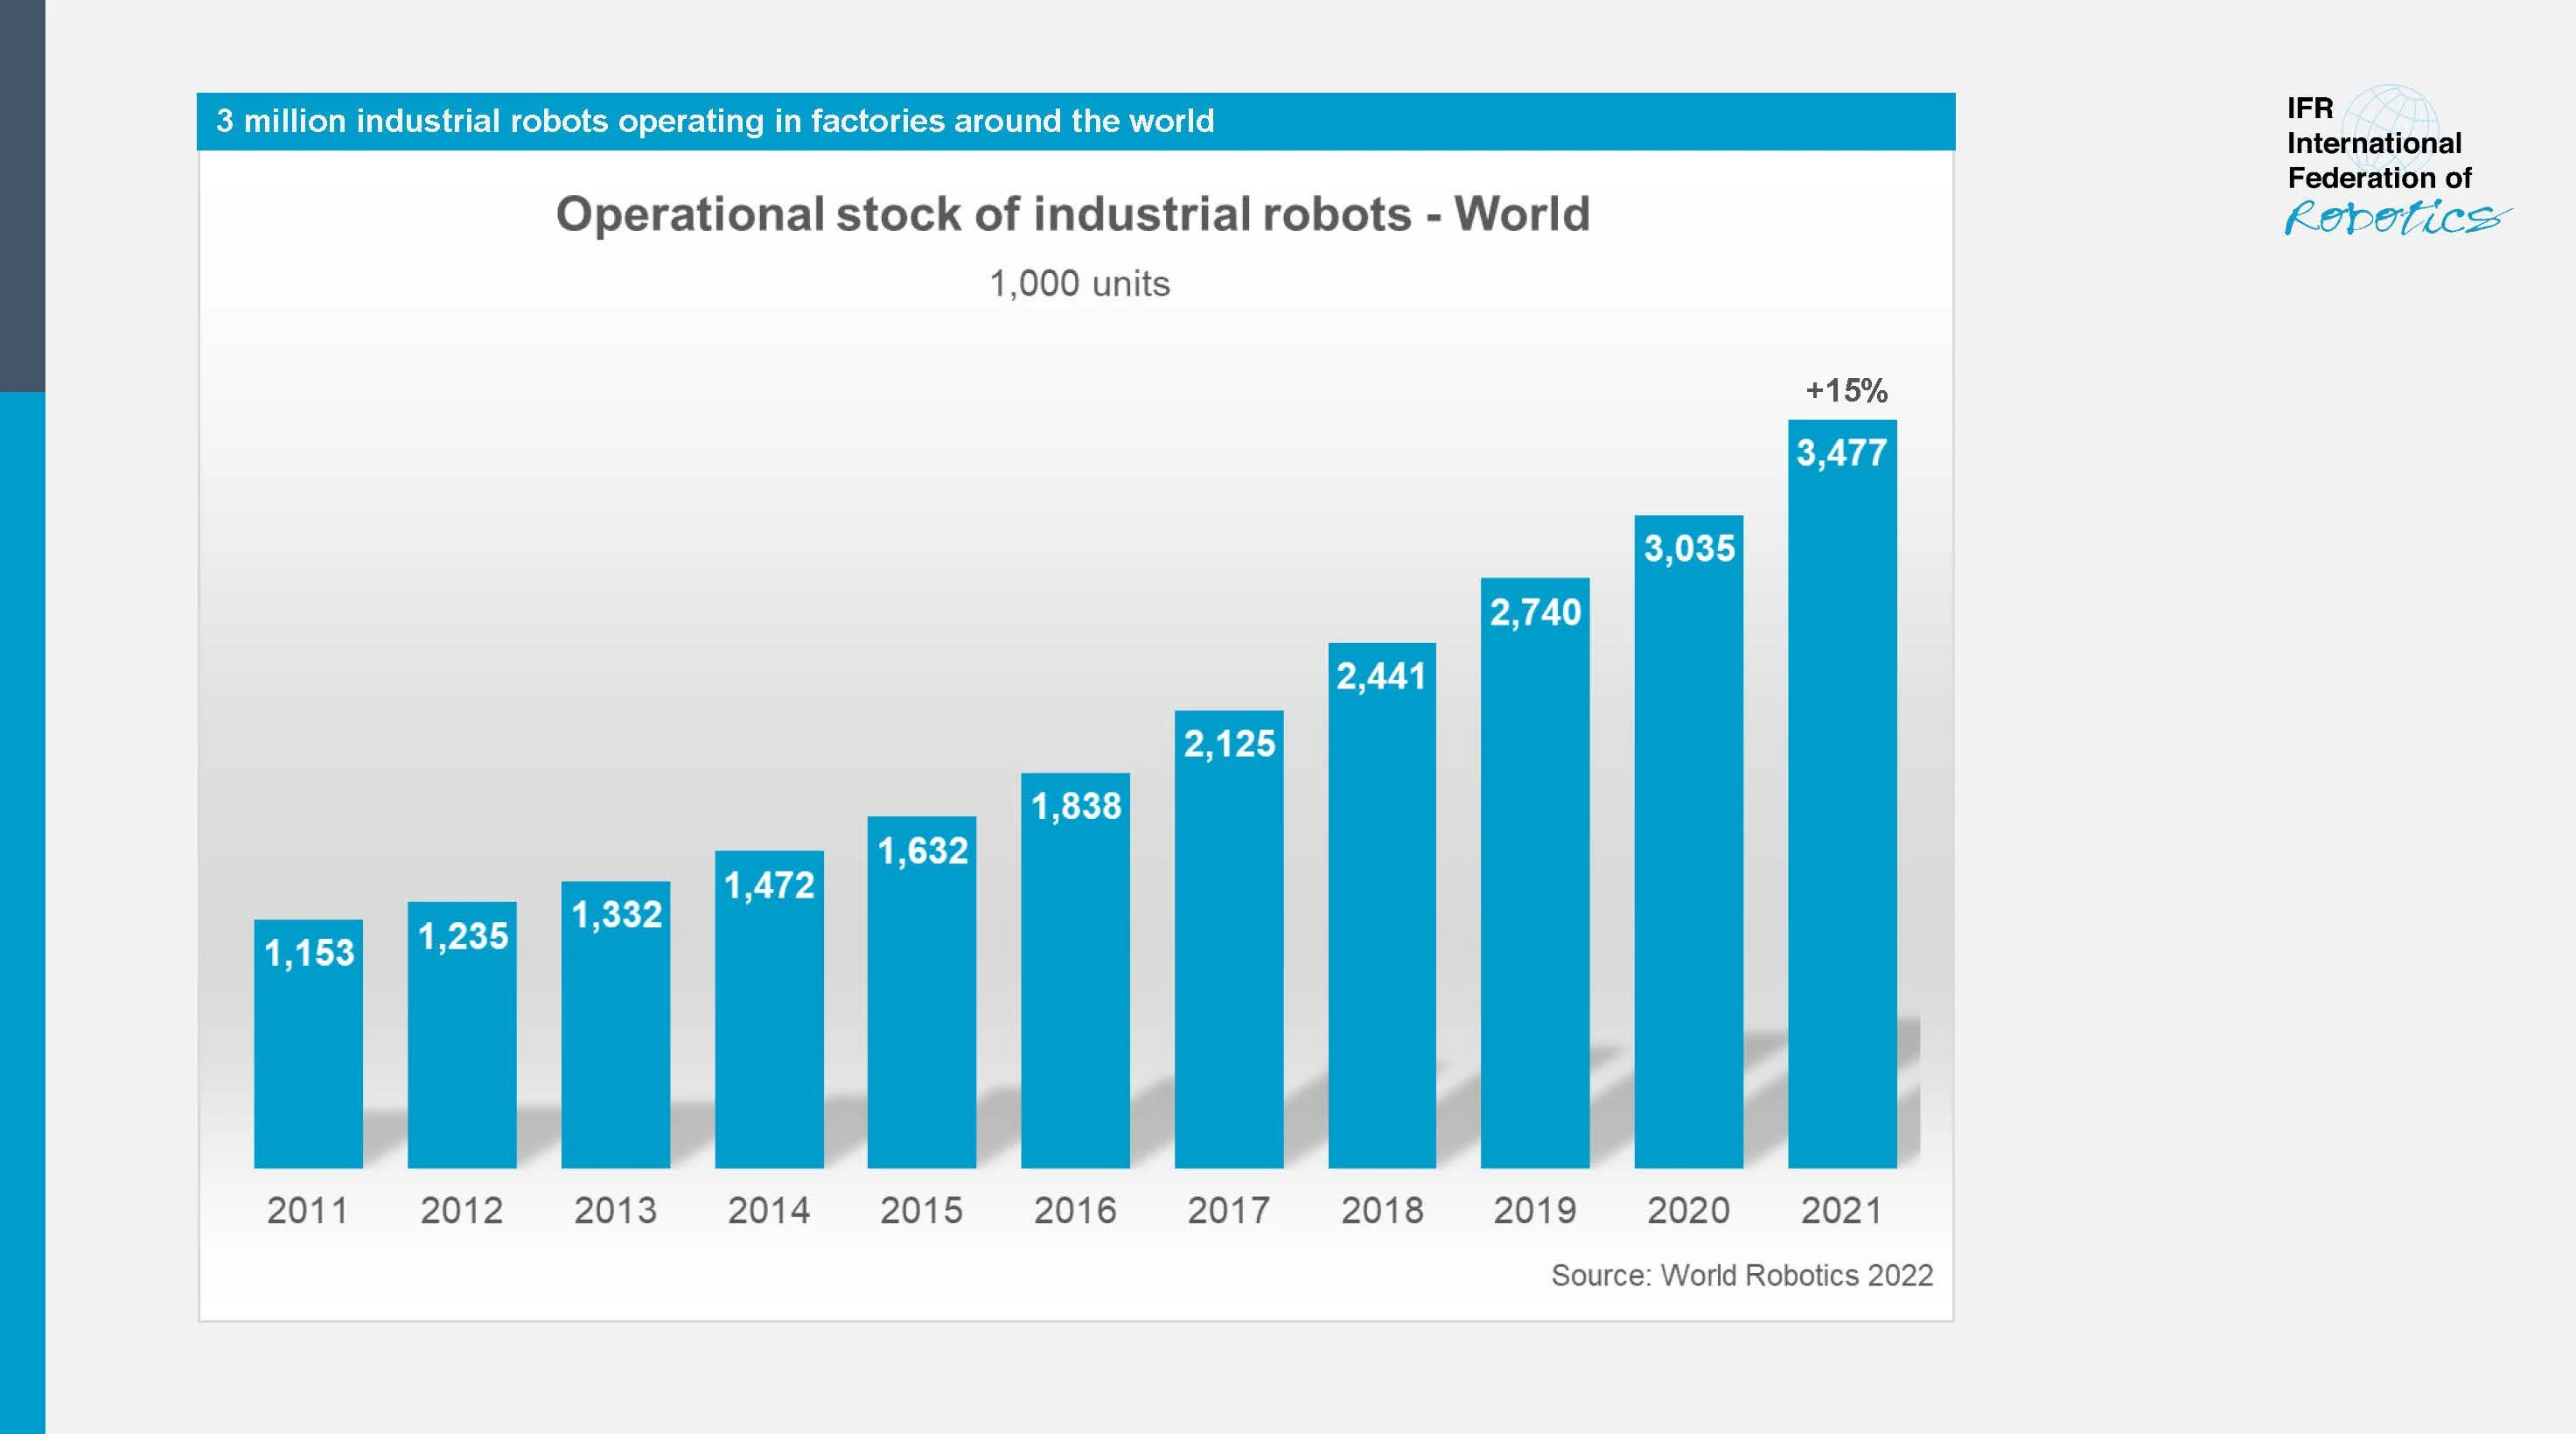 Worldwide annual robot installations between 2015 and 2021 more than doubled